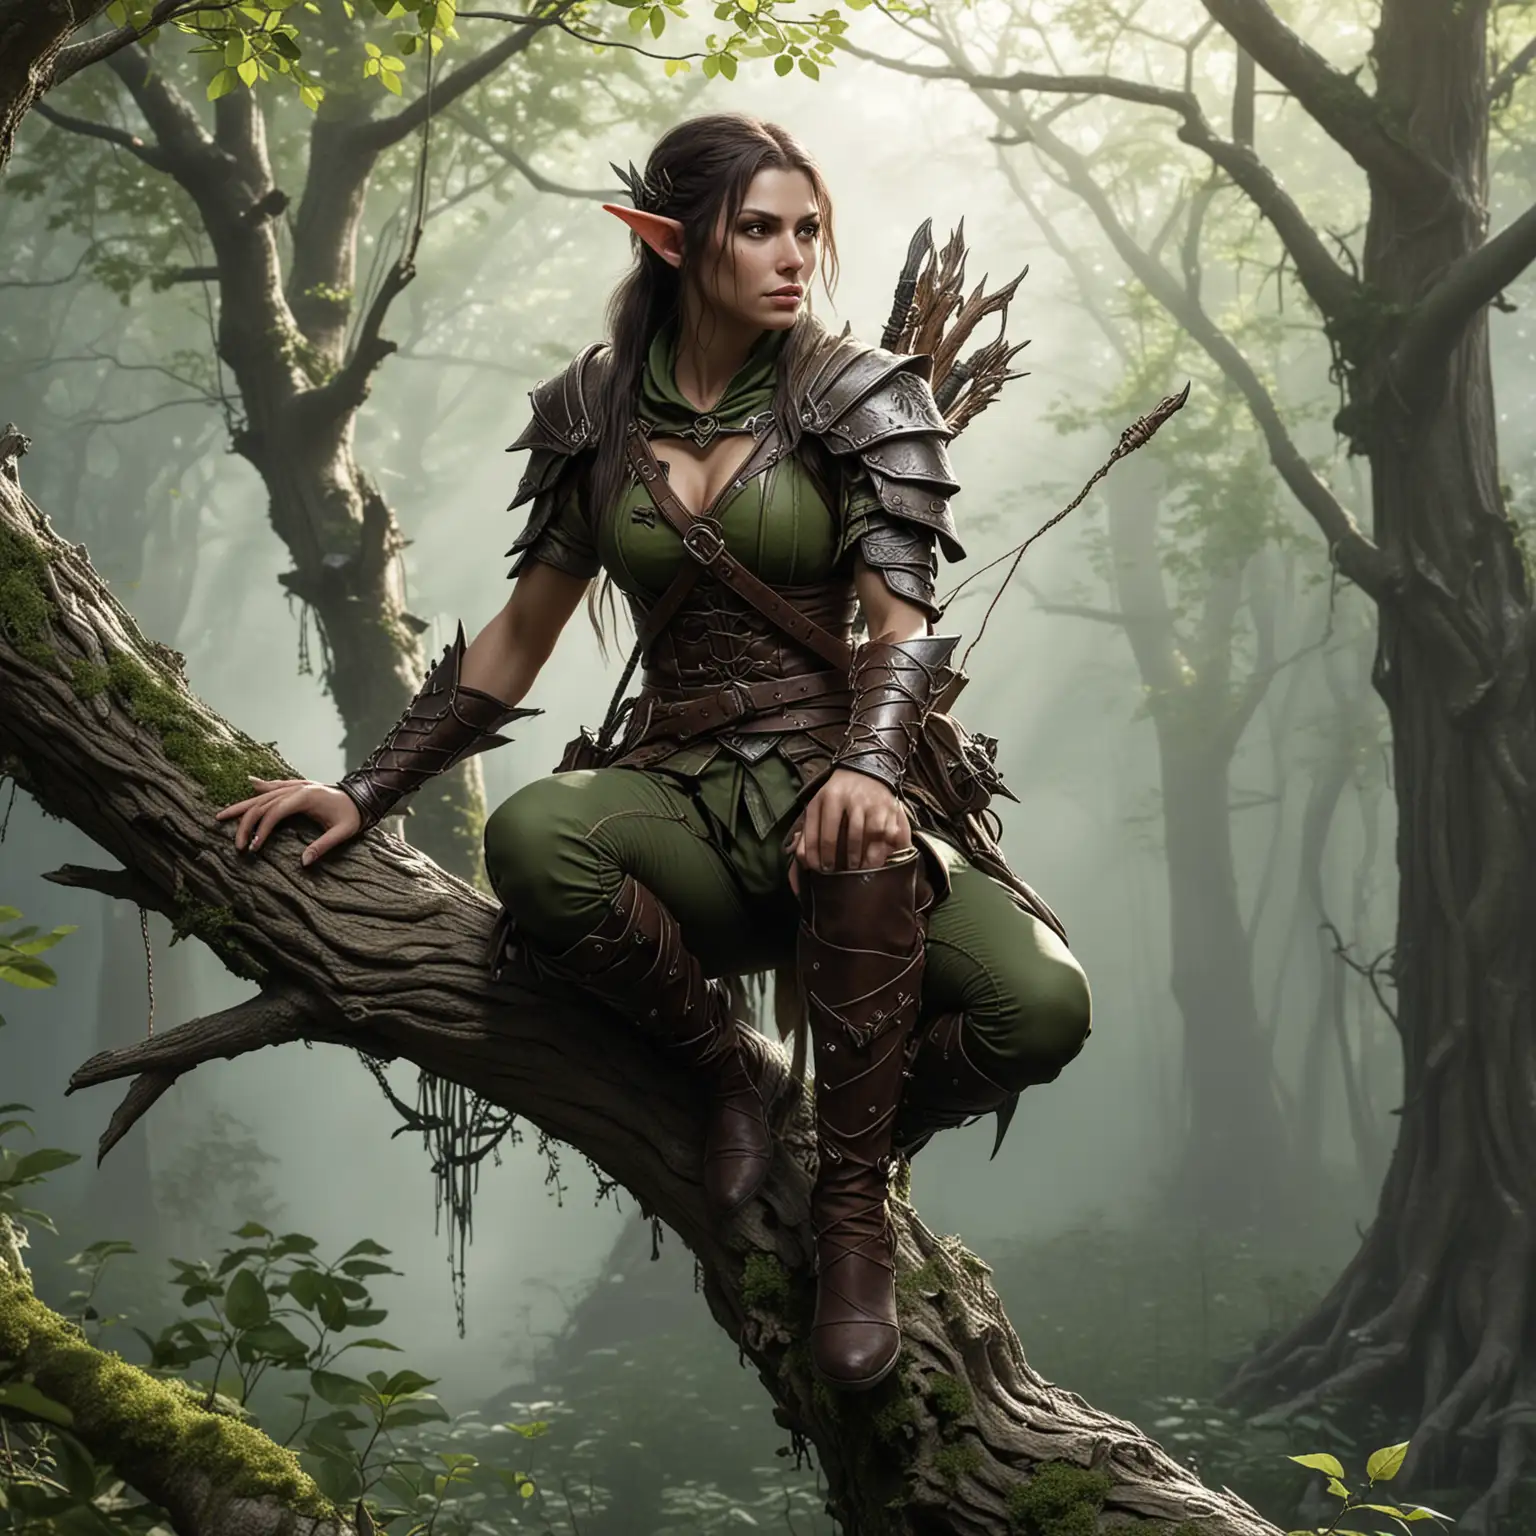 wood elf ranger perched in on a tree branch, fantasy